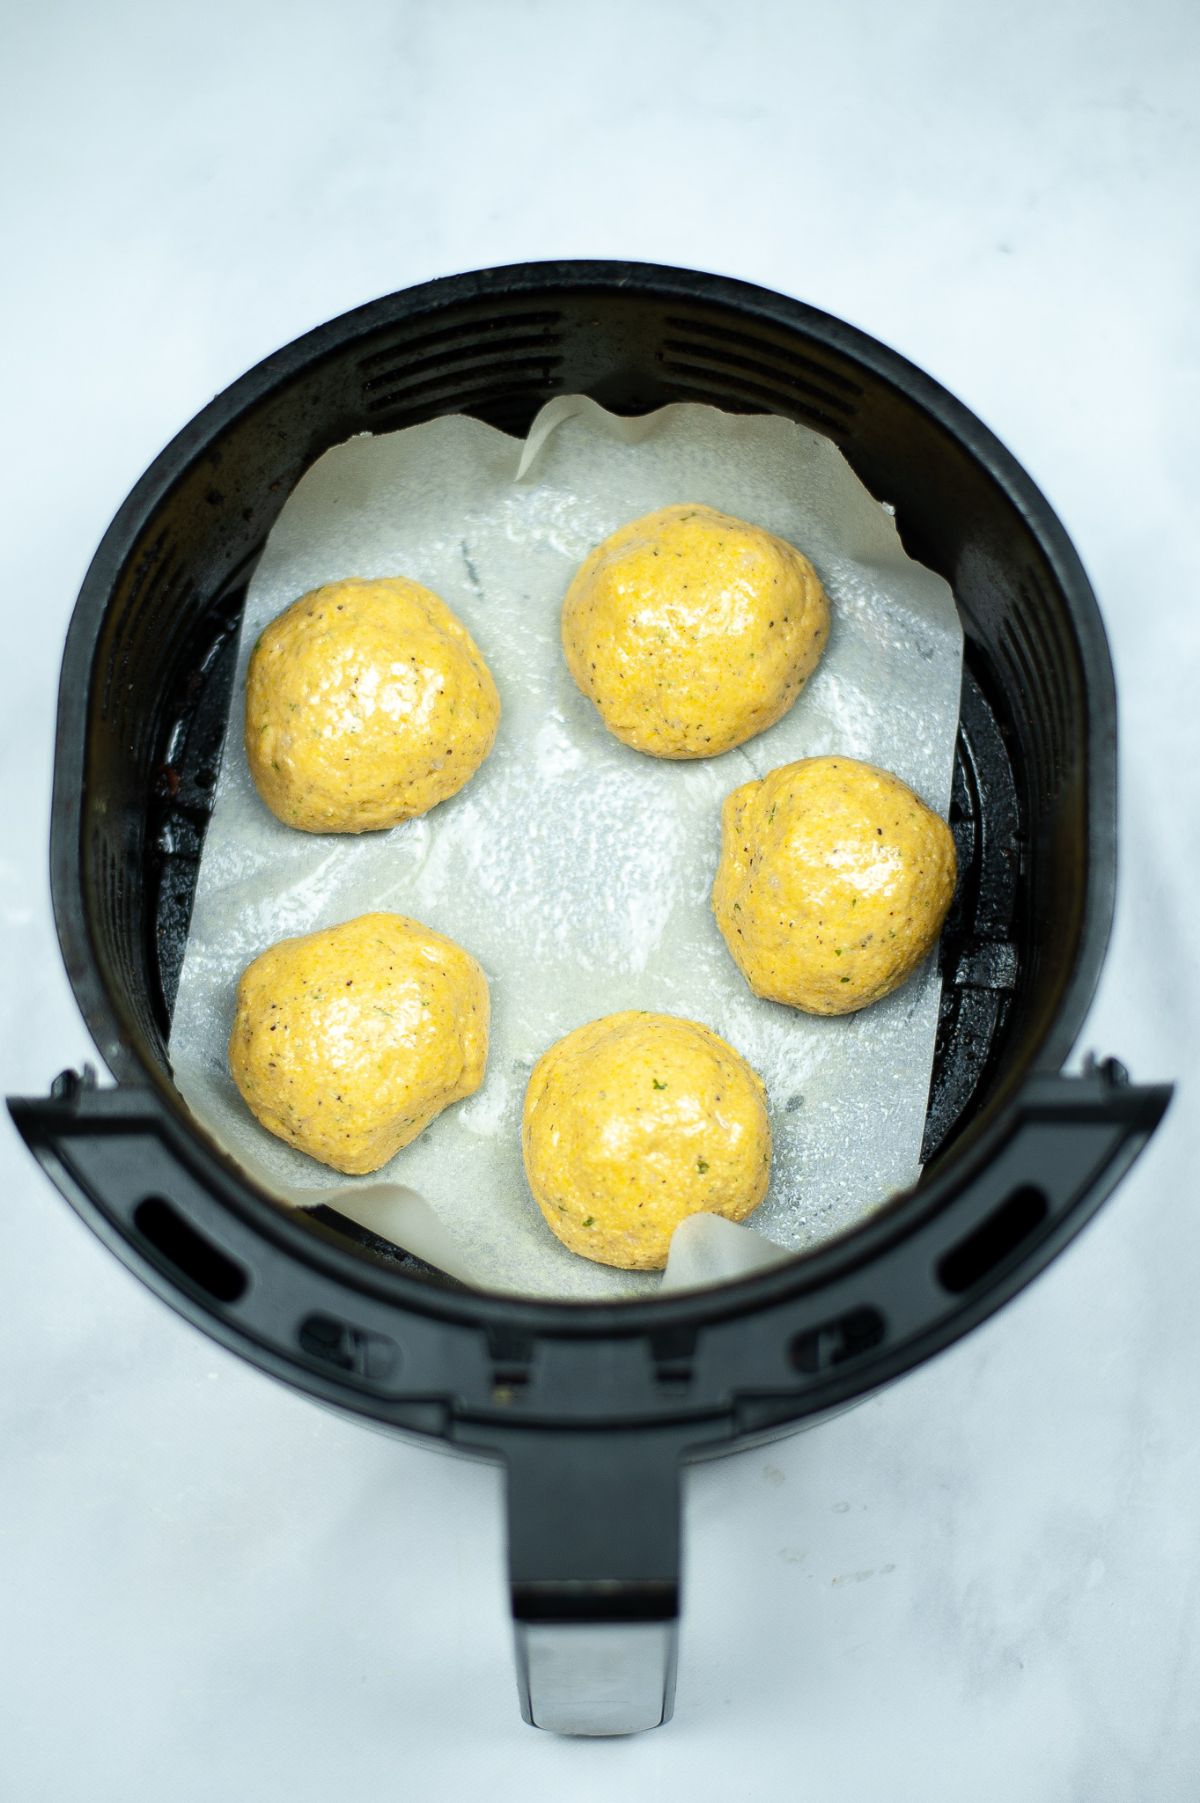 Shaped Air Fryer Hush Puppies in an air fryer basket ready for cooking.